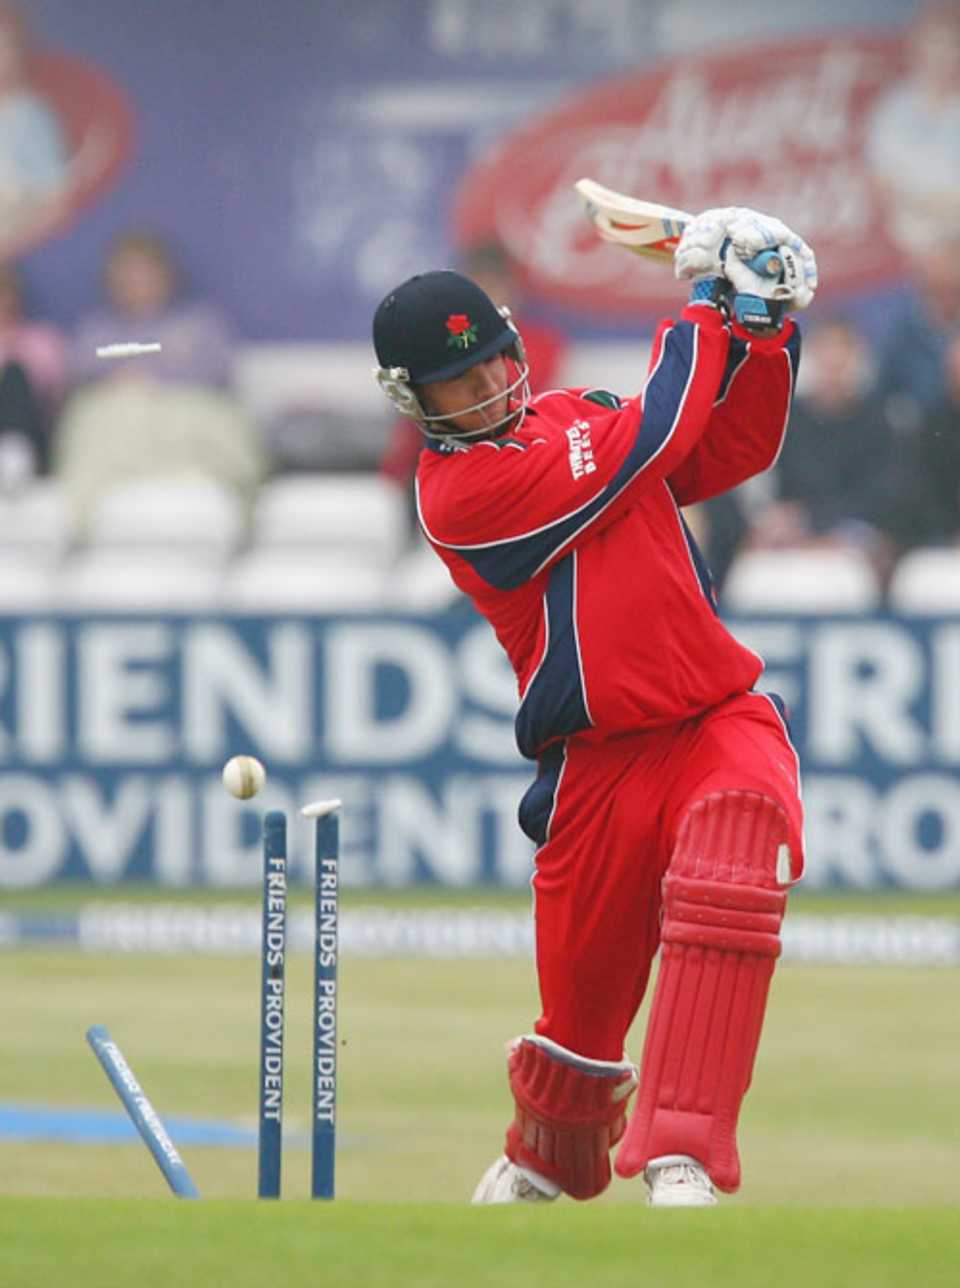 Oliver Newby swings and misses, Lancashire v Yorkshire, FP Trophy, Leeds, May 28, 2008